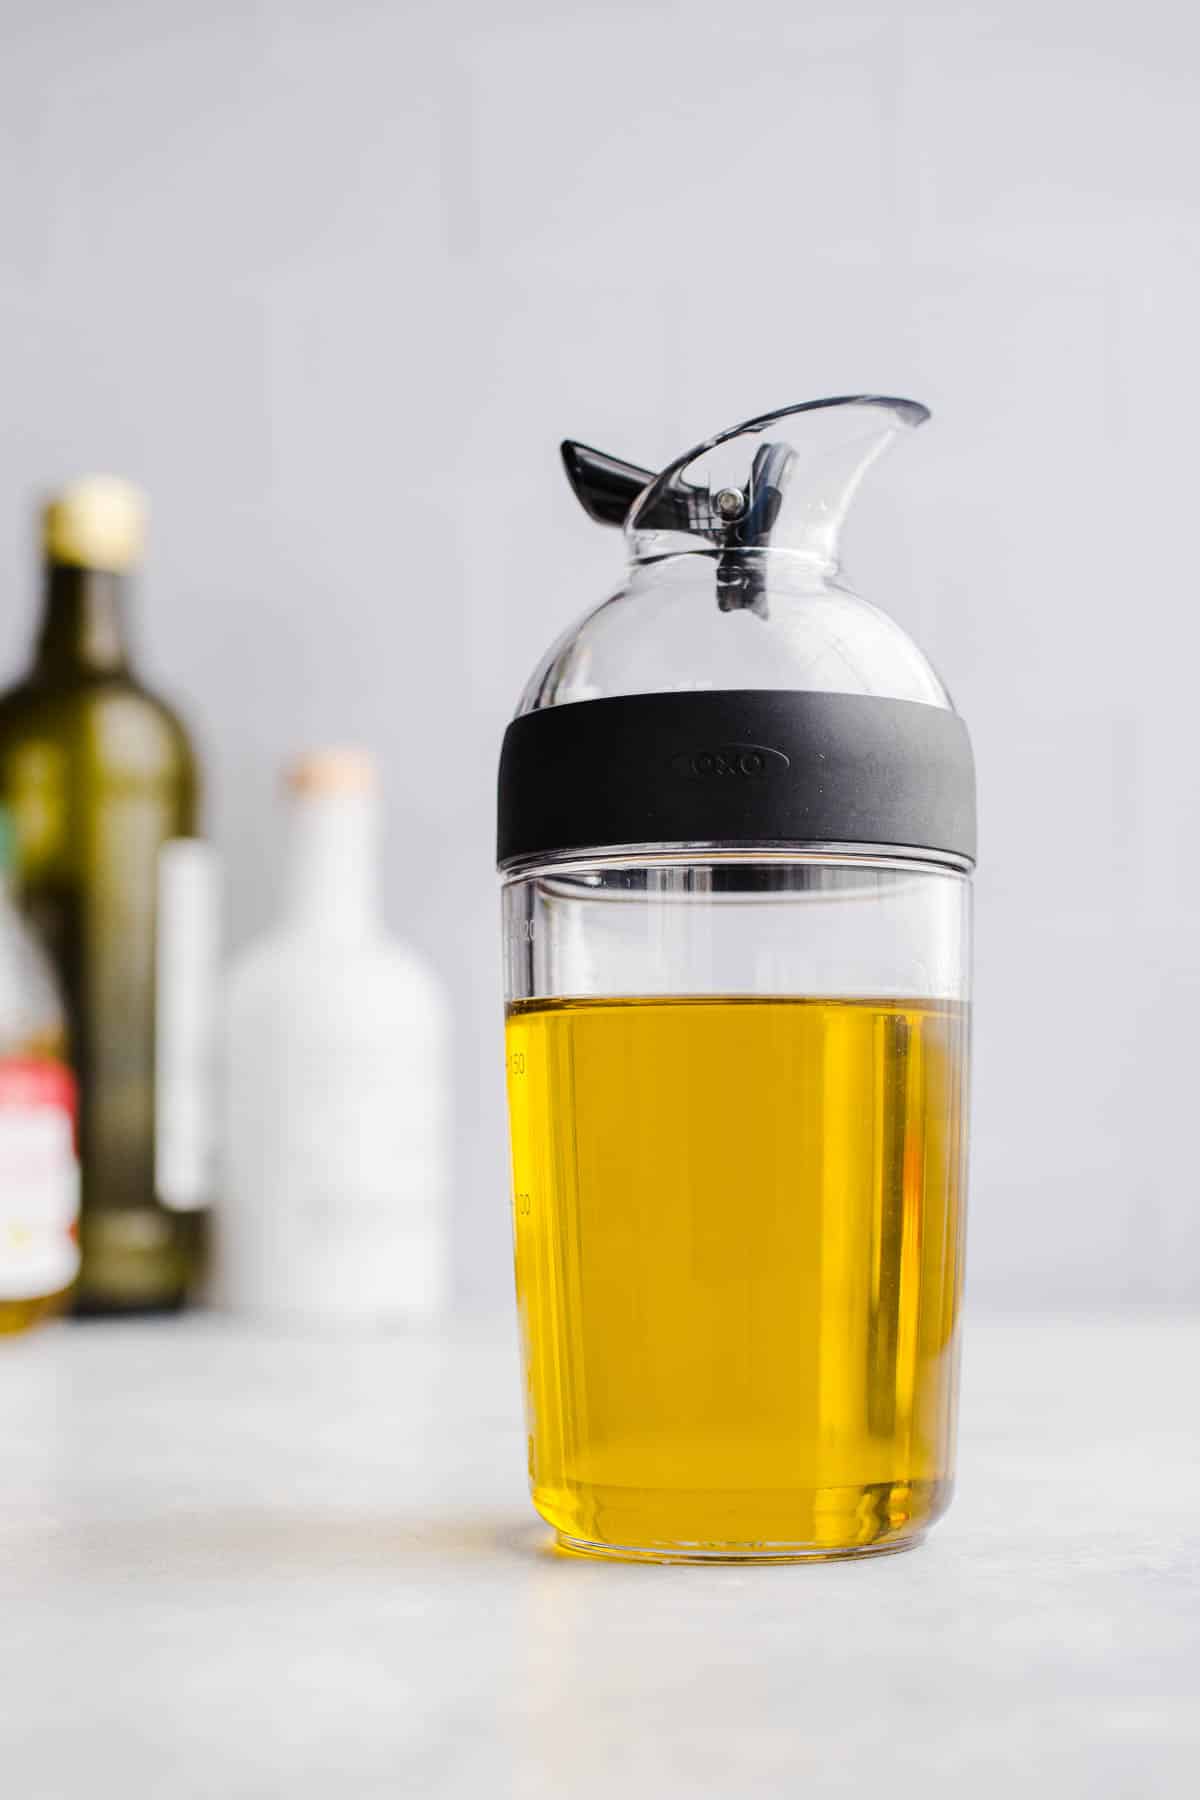 A bottle with a spout filled with oil.